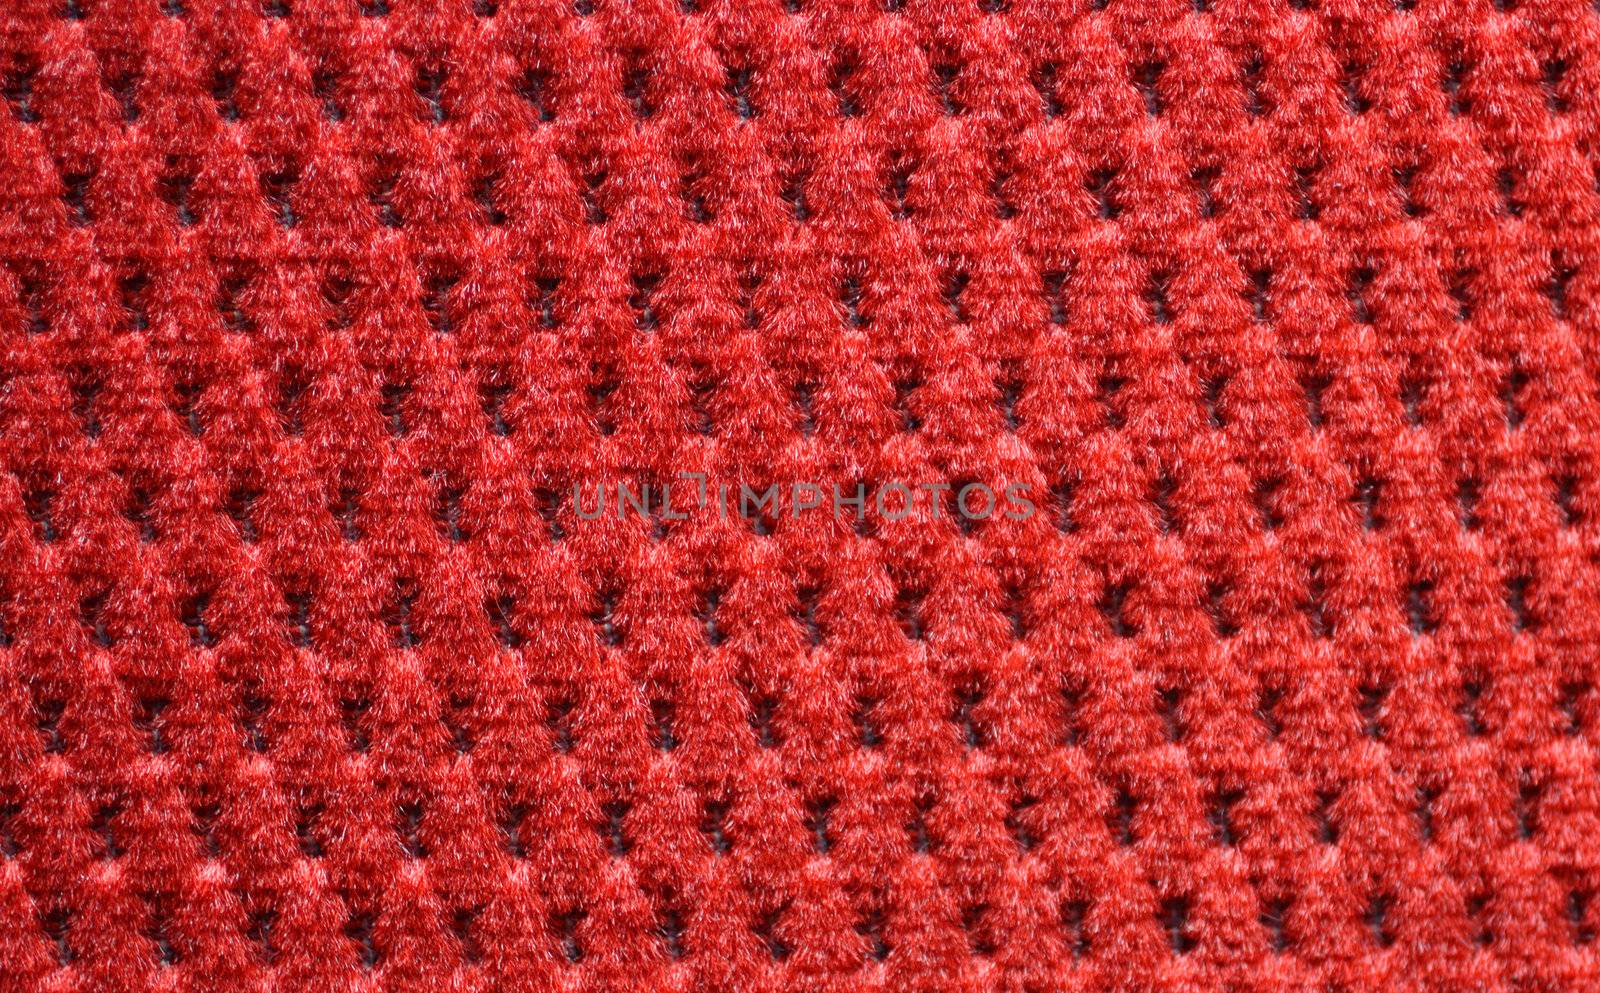 red upholster material of armchair close-up